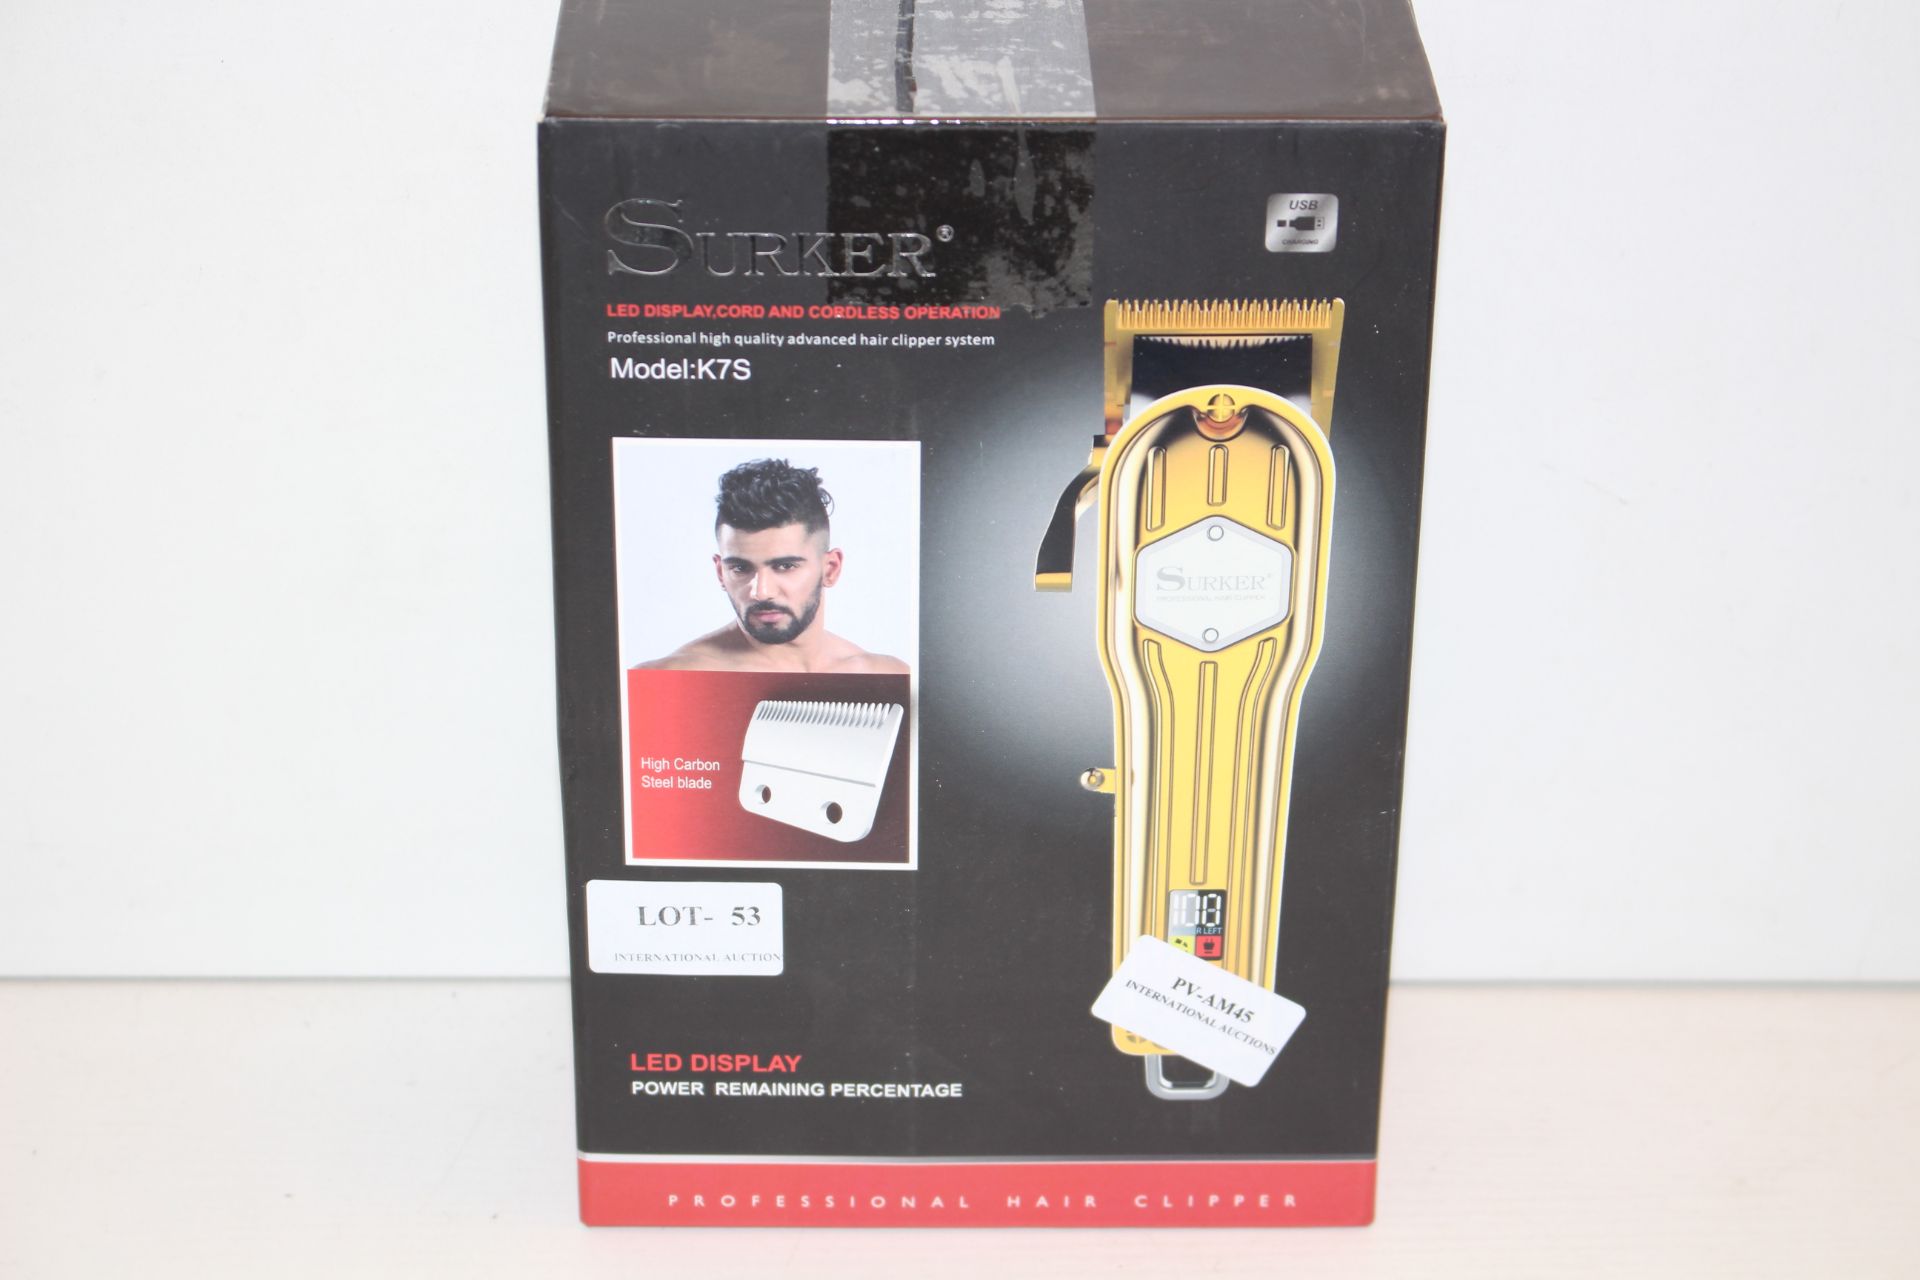 BOXED SURKER PROFESSIONAL HIGH QUALITY ADVANCED HAIR CLIPPER SYSTEM MODEL: K7S RRP £60.64Condition